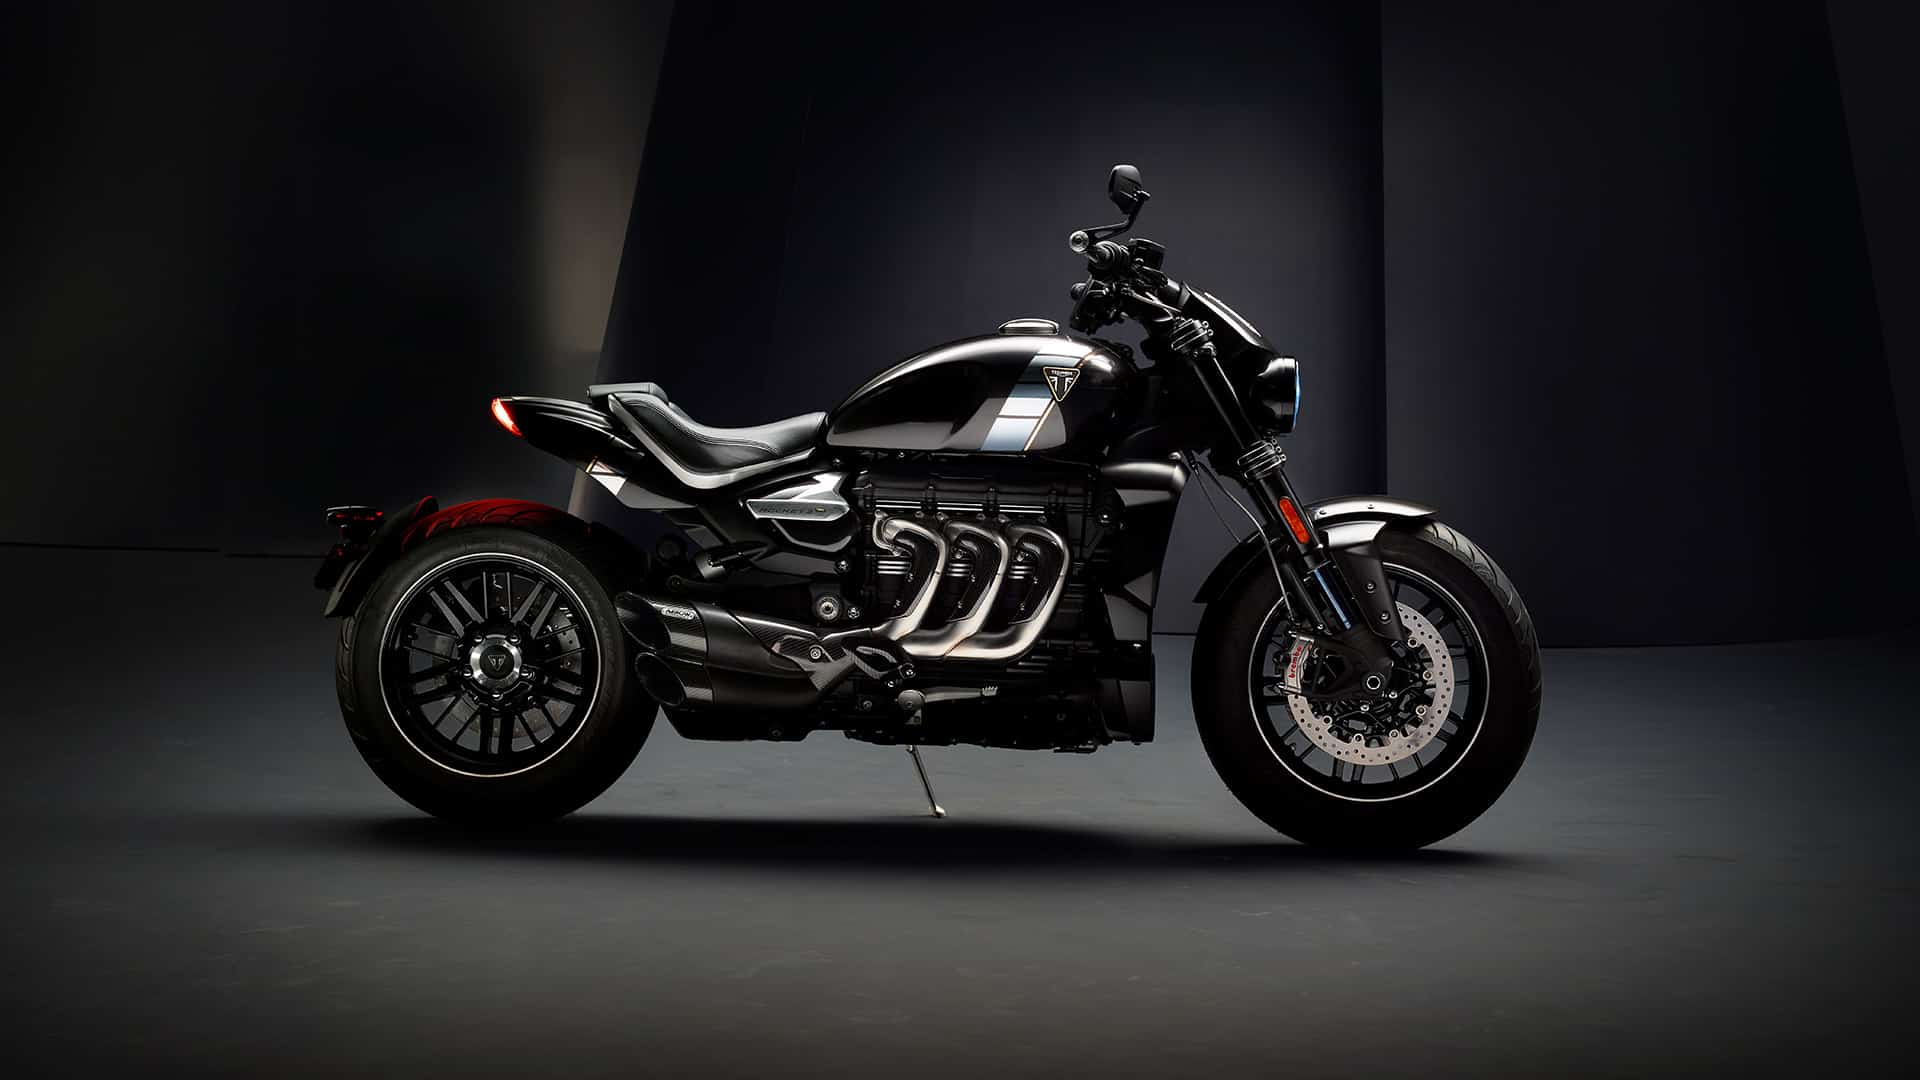 Bigger Better And More Powerful The 2019 Triumph Rocket 3 Factory Custom